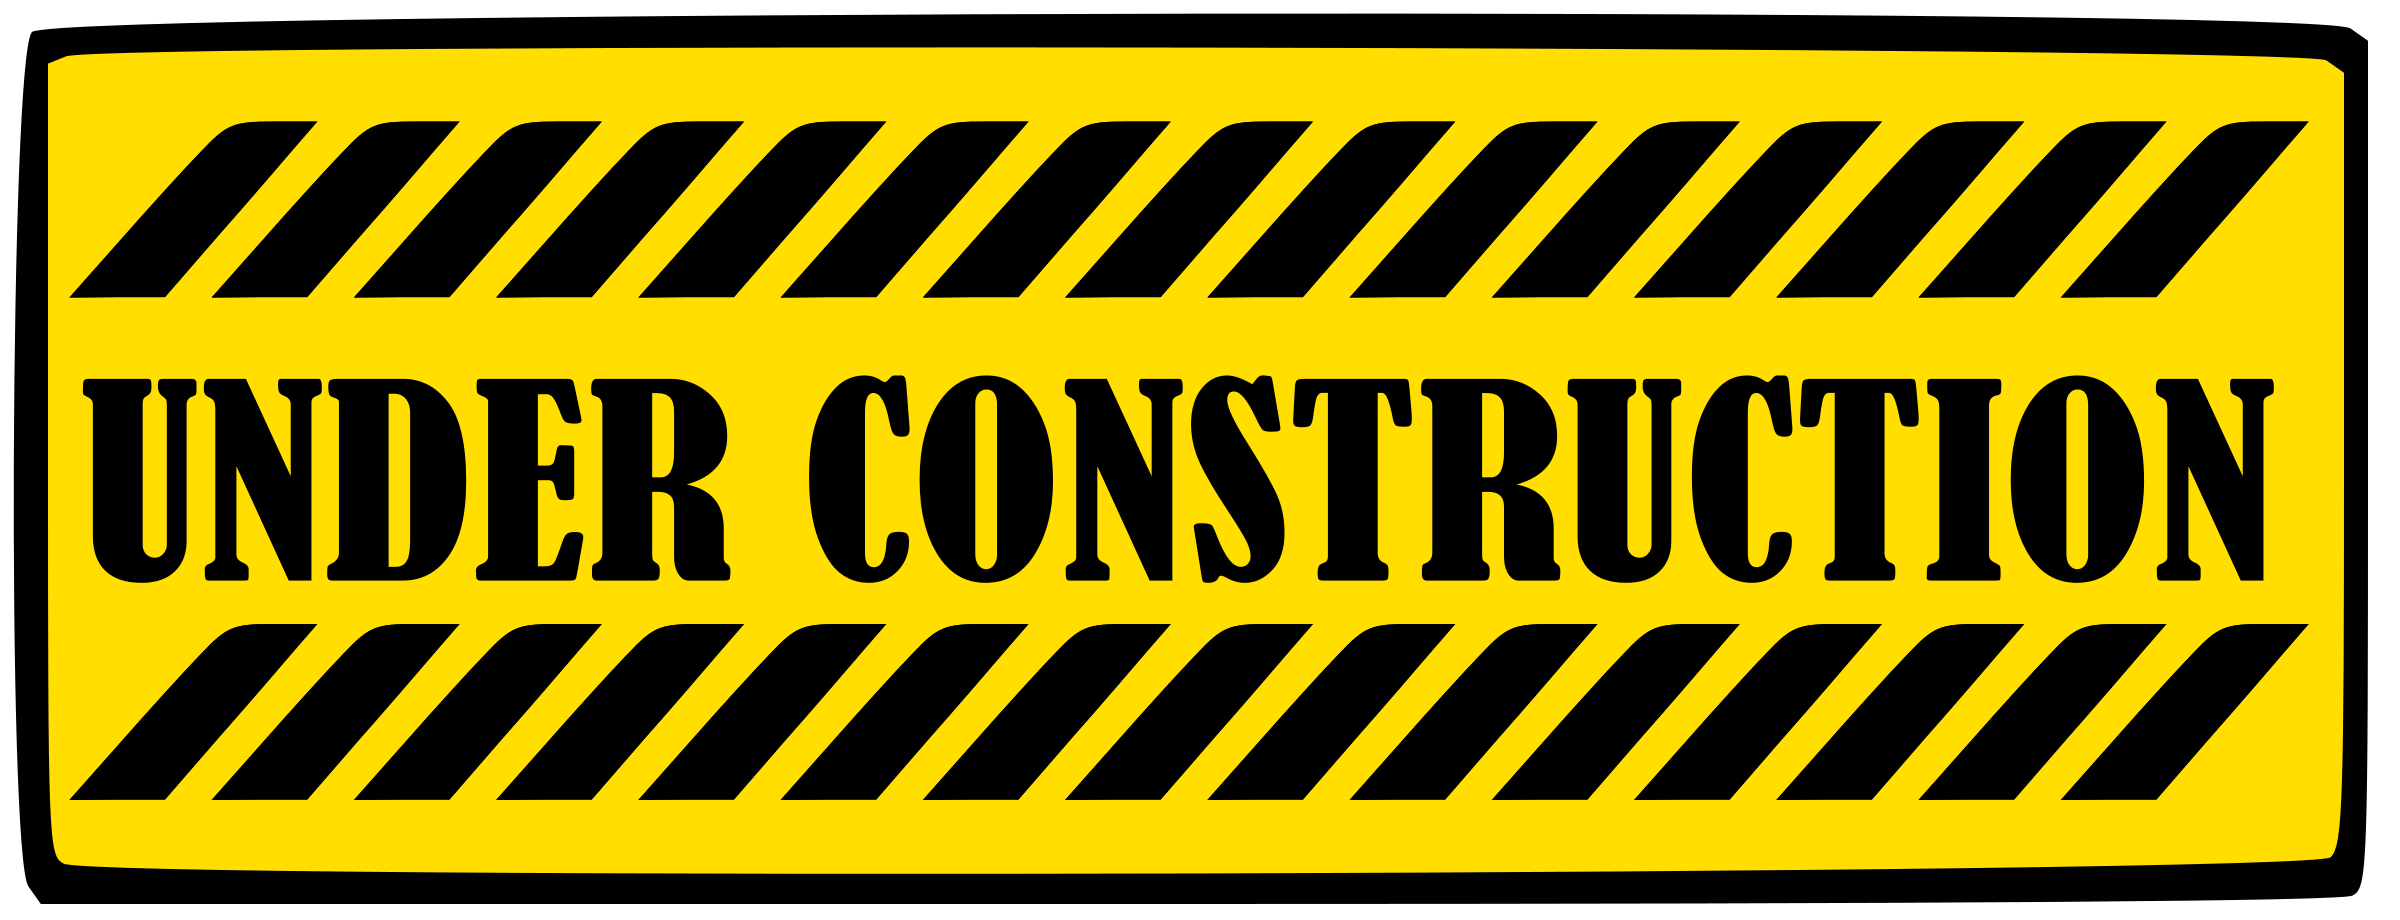 free clipart under construction sign - photo #30